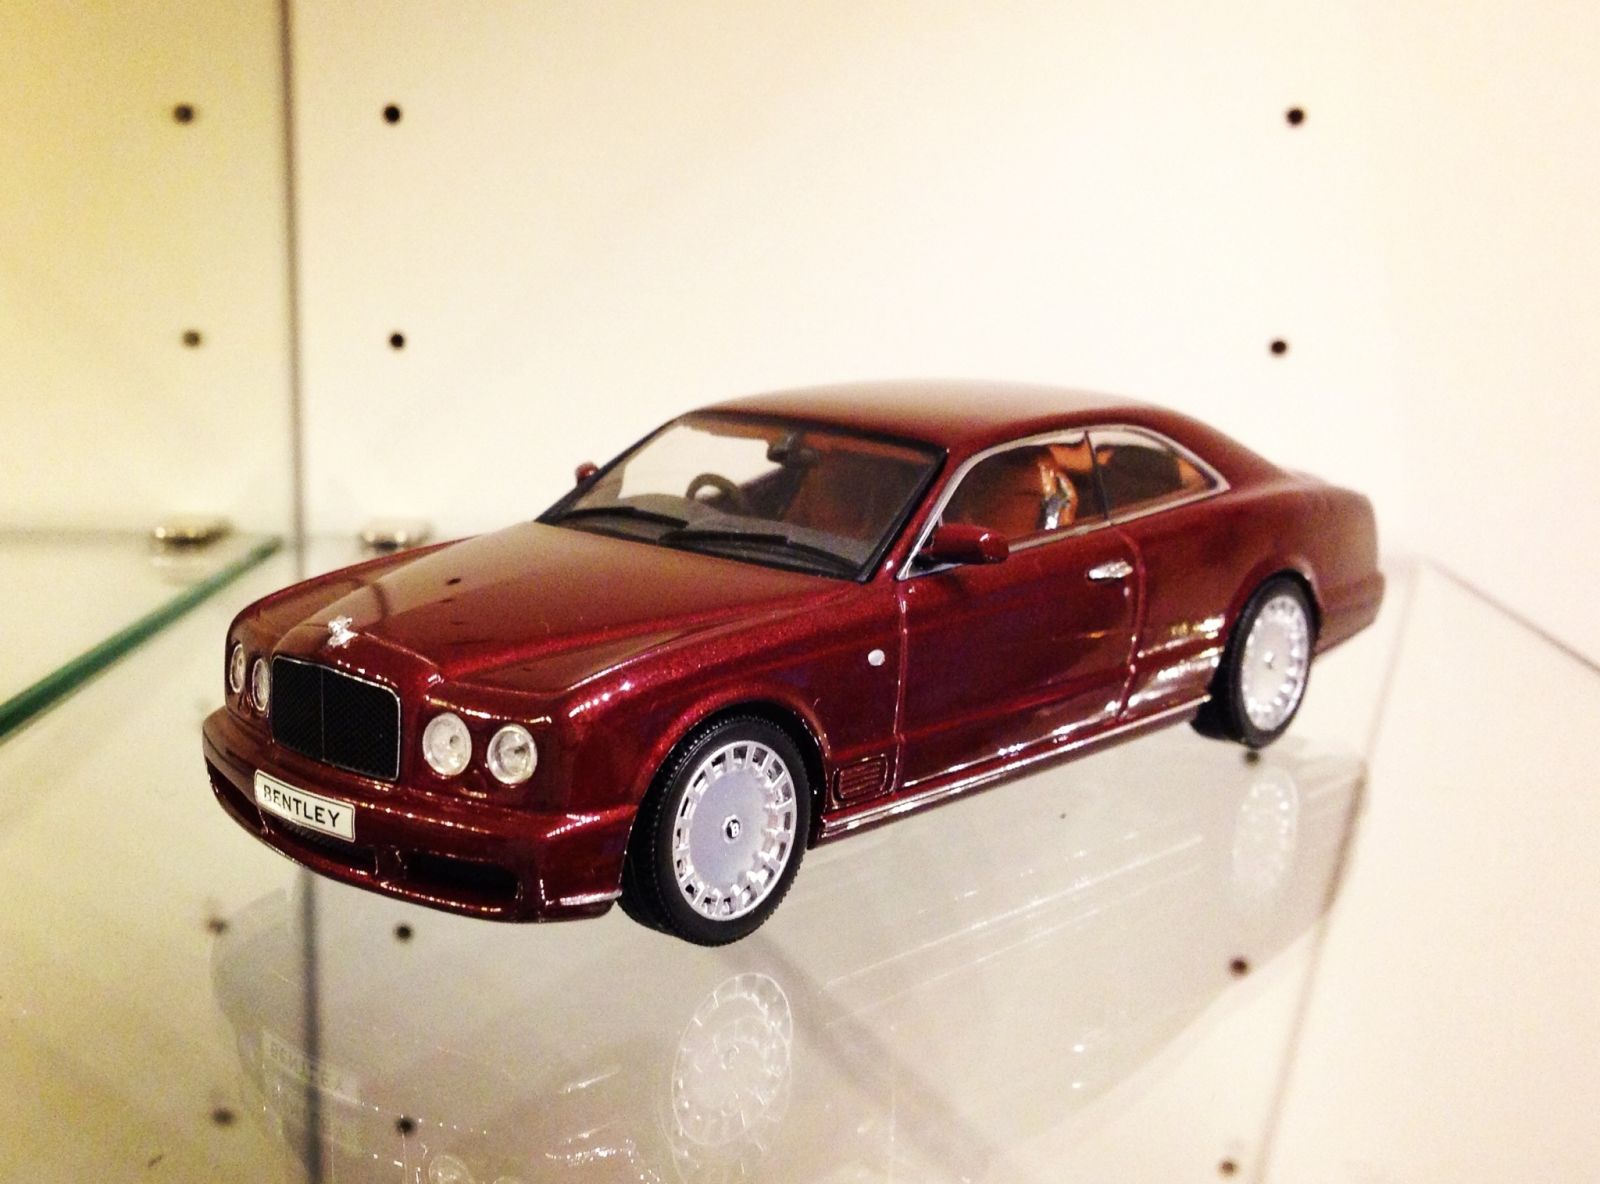 Illustration for article titled Finally snagged a Bentley Brooklands!